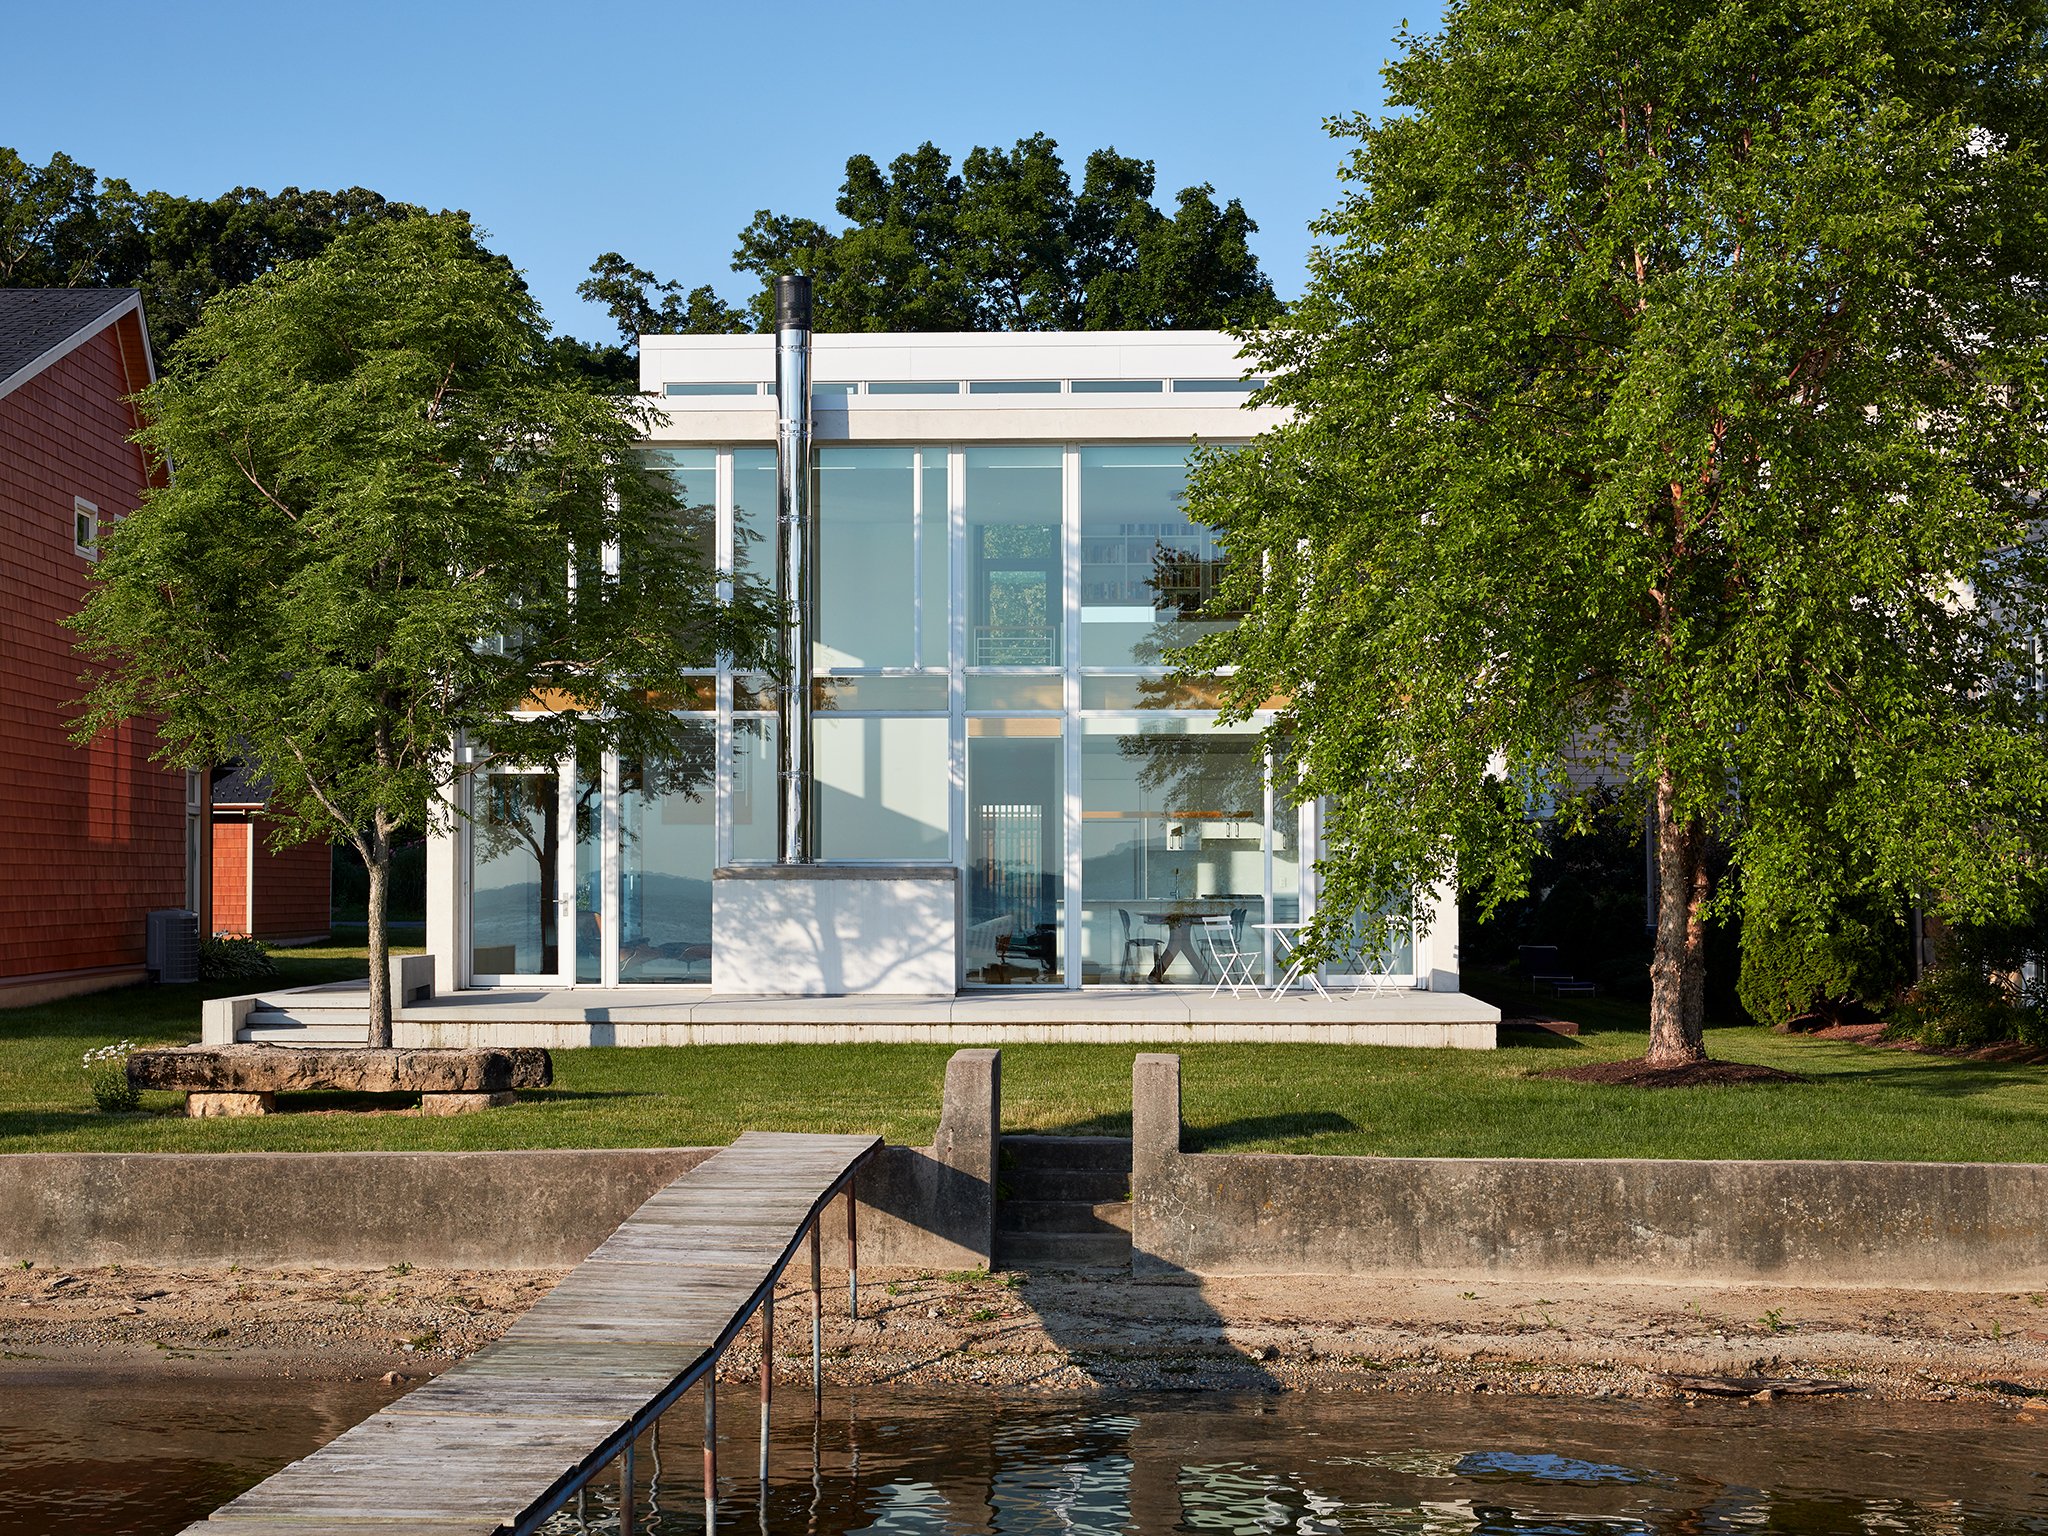  Spring Harbor House  N. Scott Johnson, XDEA Architects  Madison, WI     Return to Projects  